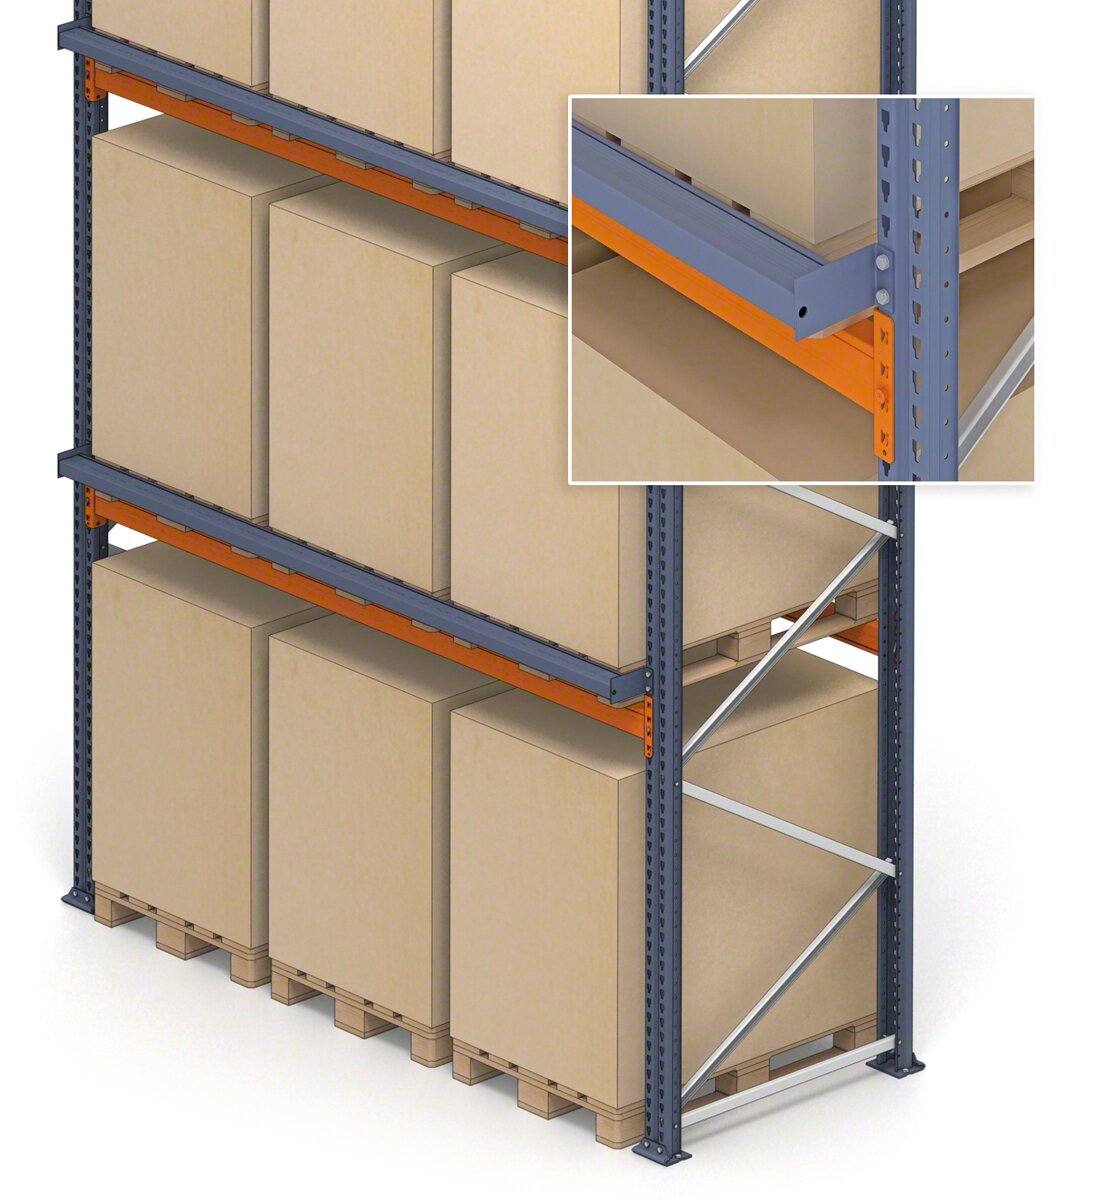 Example of a profile for correct pallet positioning